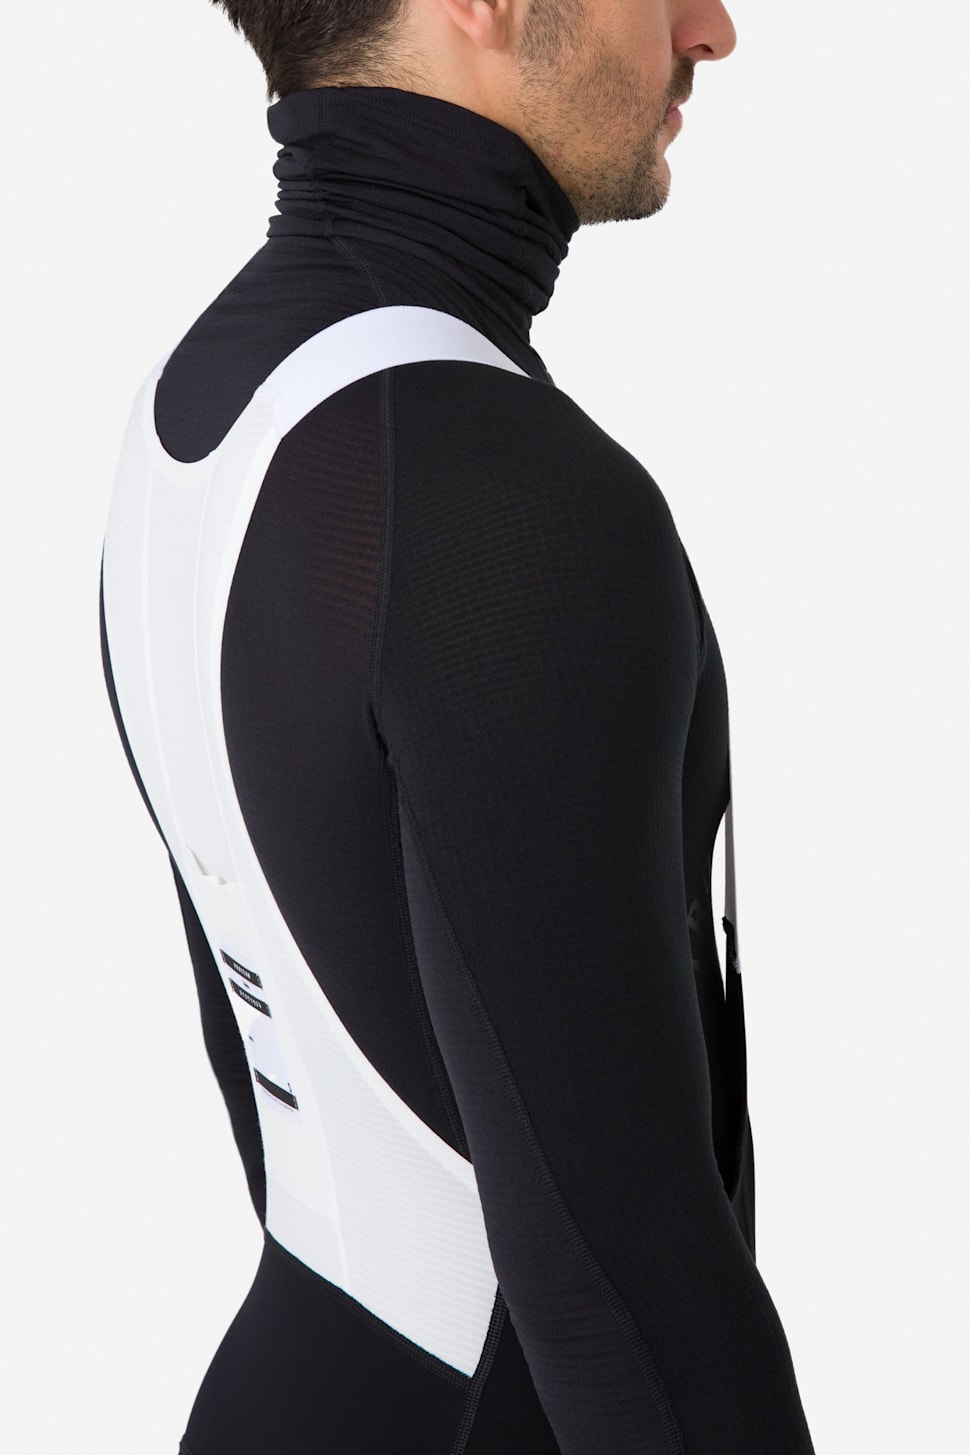 Winter Cycling Base Layer (with Collar) - for Pro Cycling | Rapha